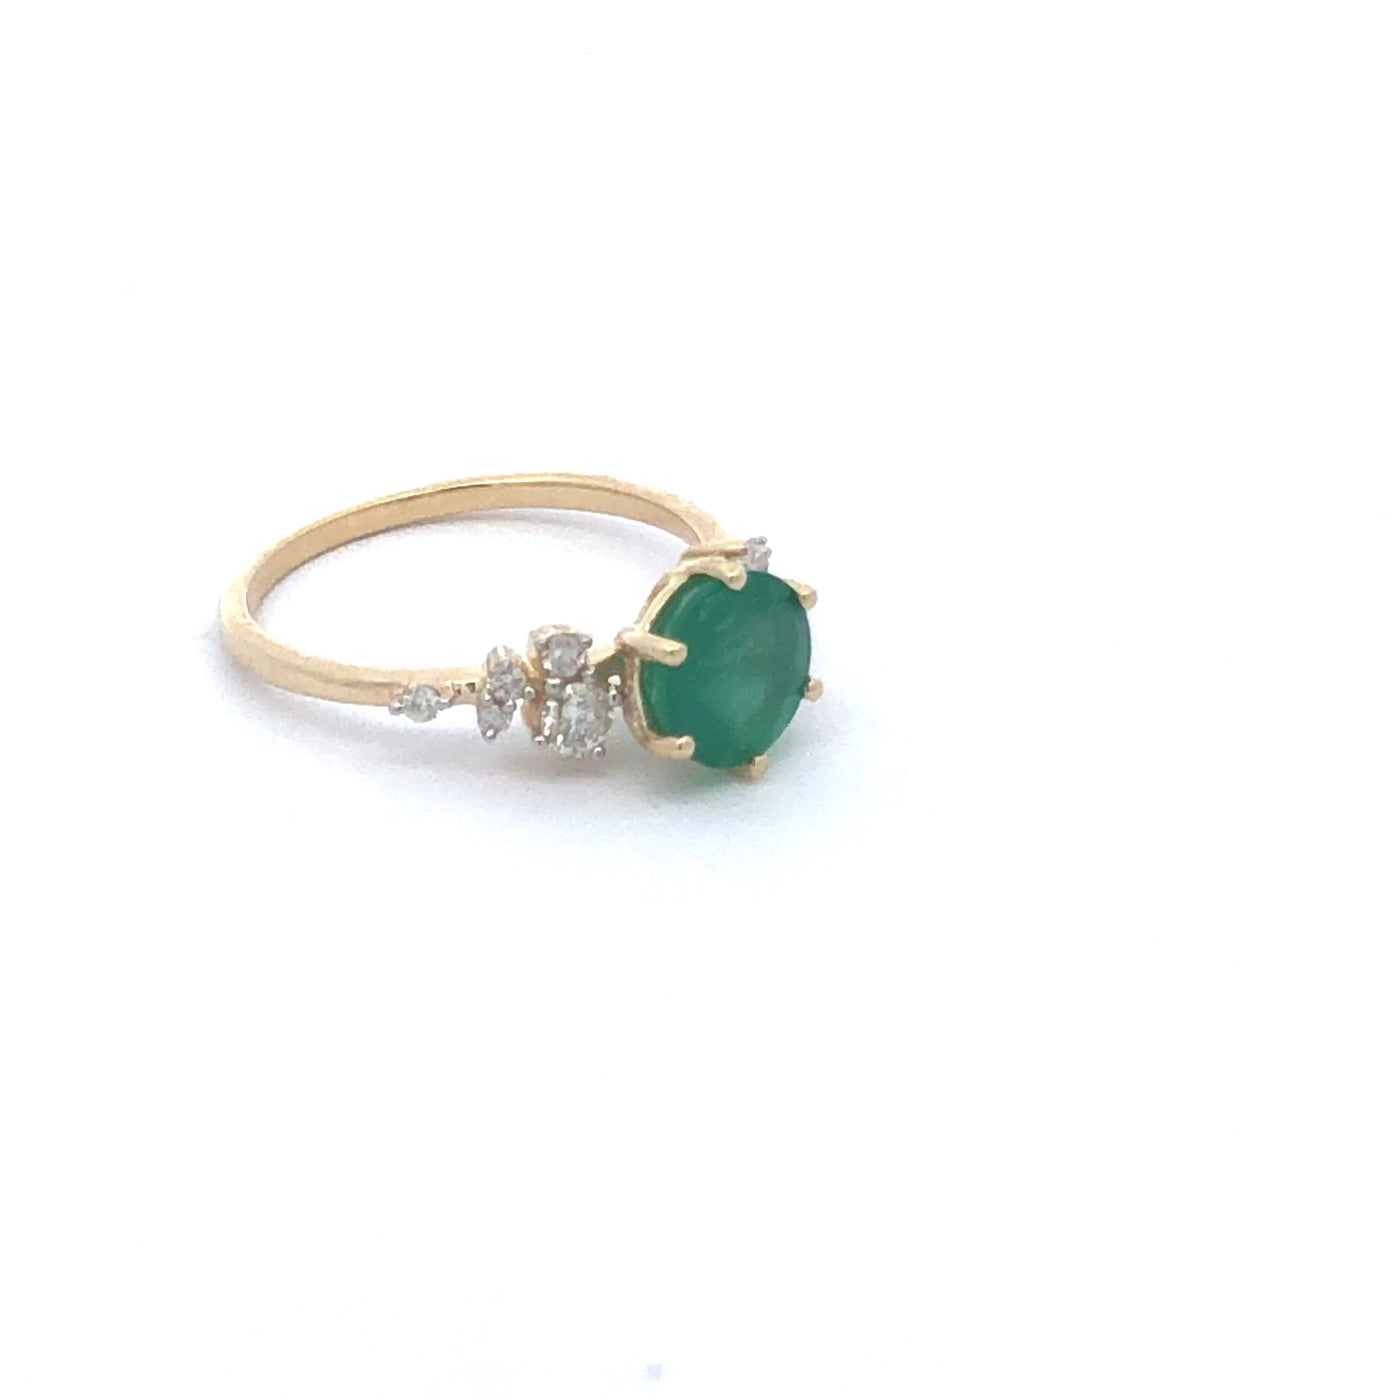 14Ct Yellow Gold Natural Emerald And Diamond Ring. Emerald = 1.33Ct. Tdw Dia - 0.20Ct